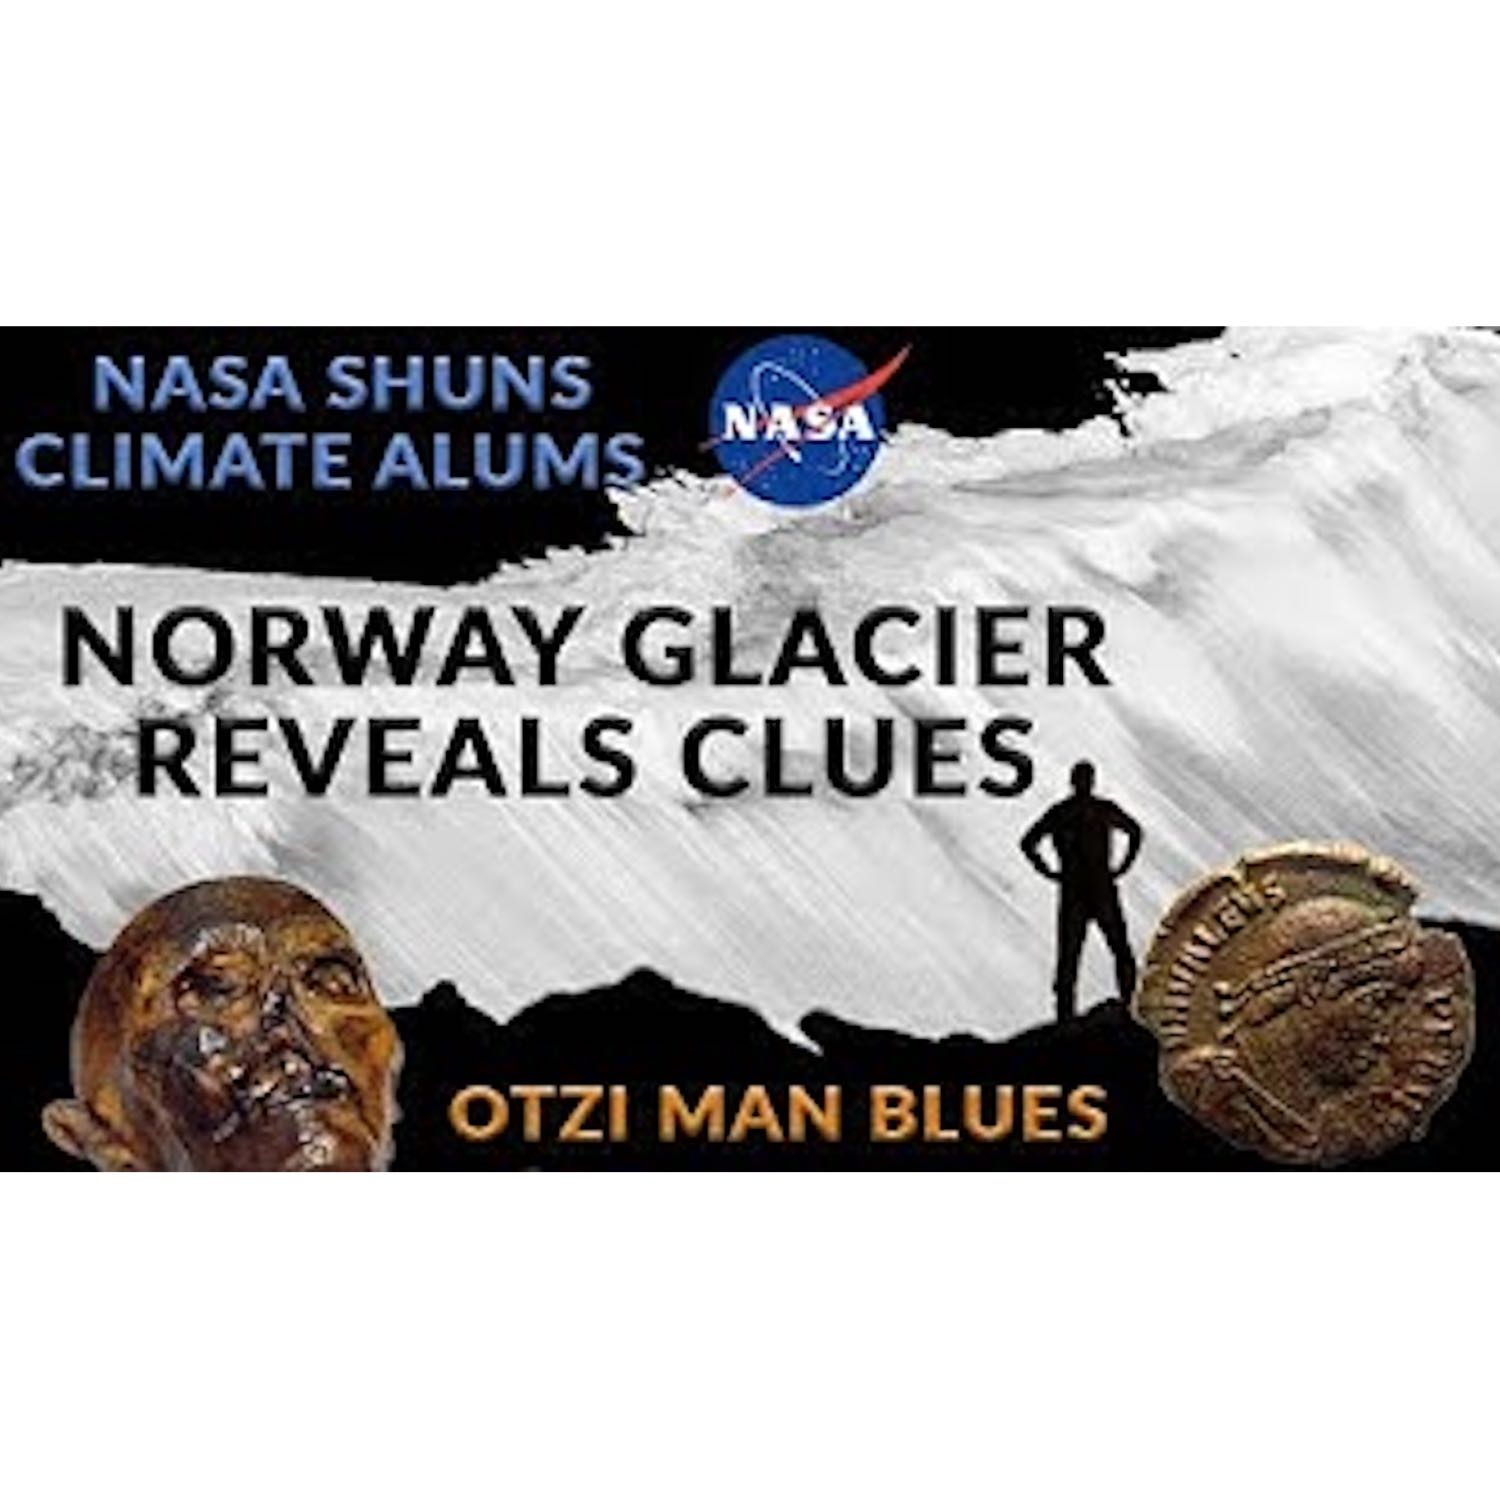 Of Glaciers and Satellites - CDN Newsletter Readout